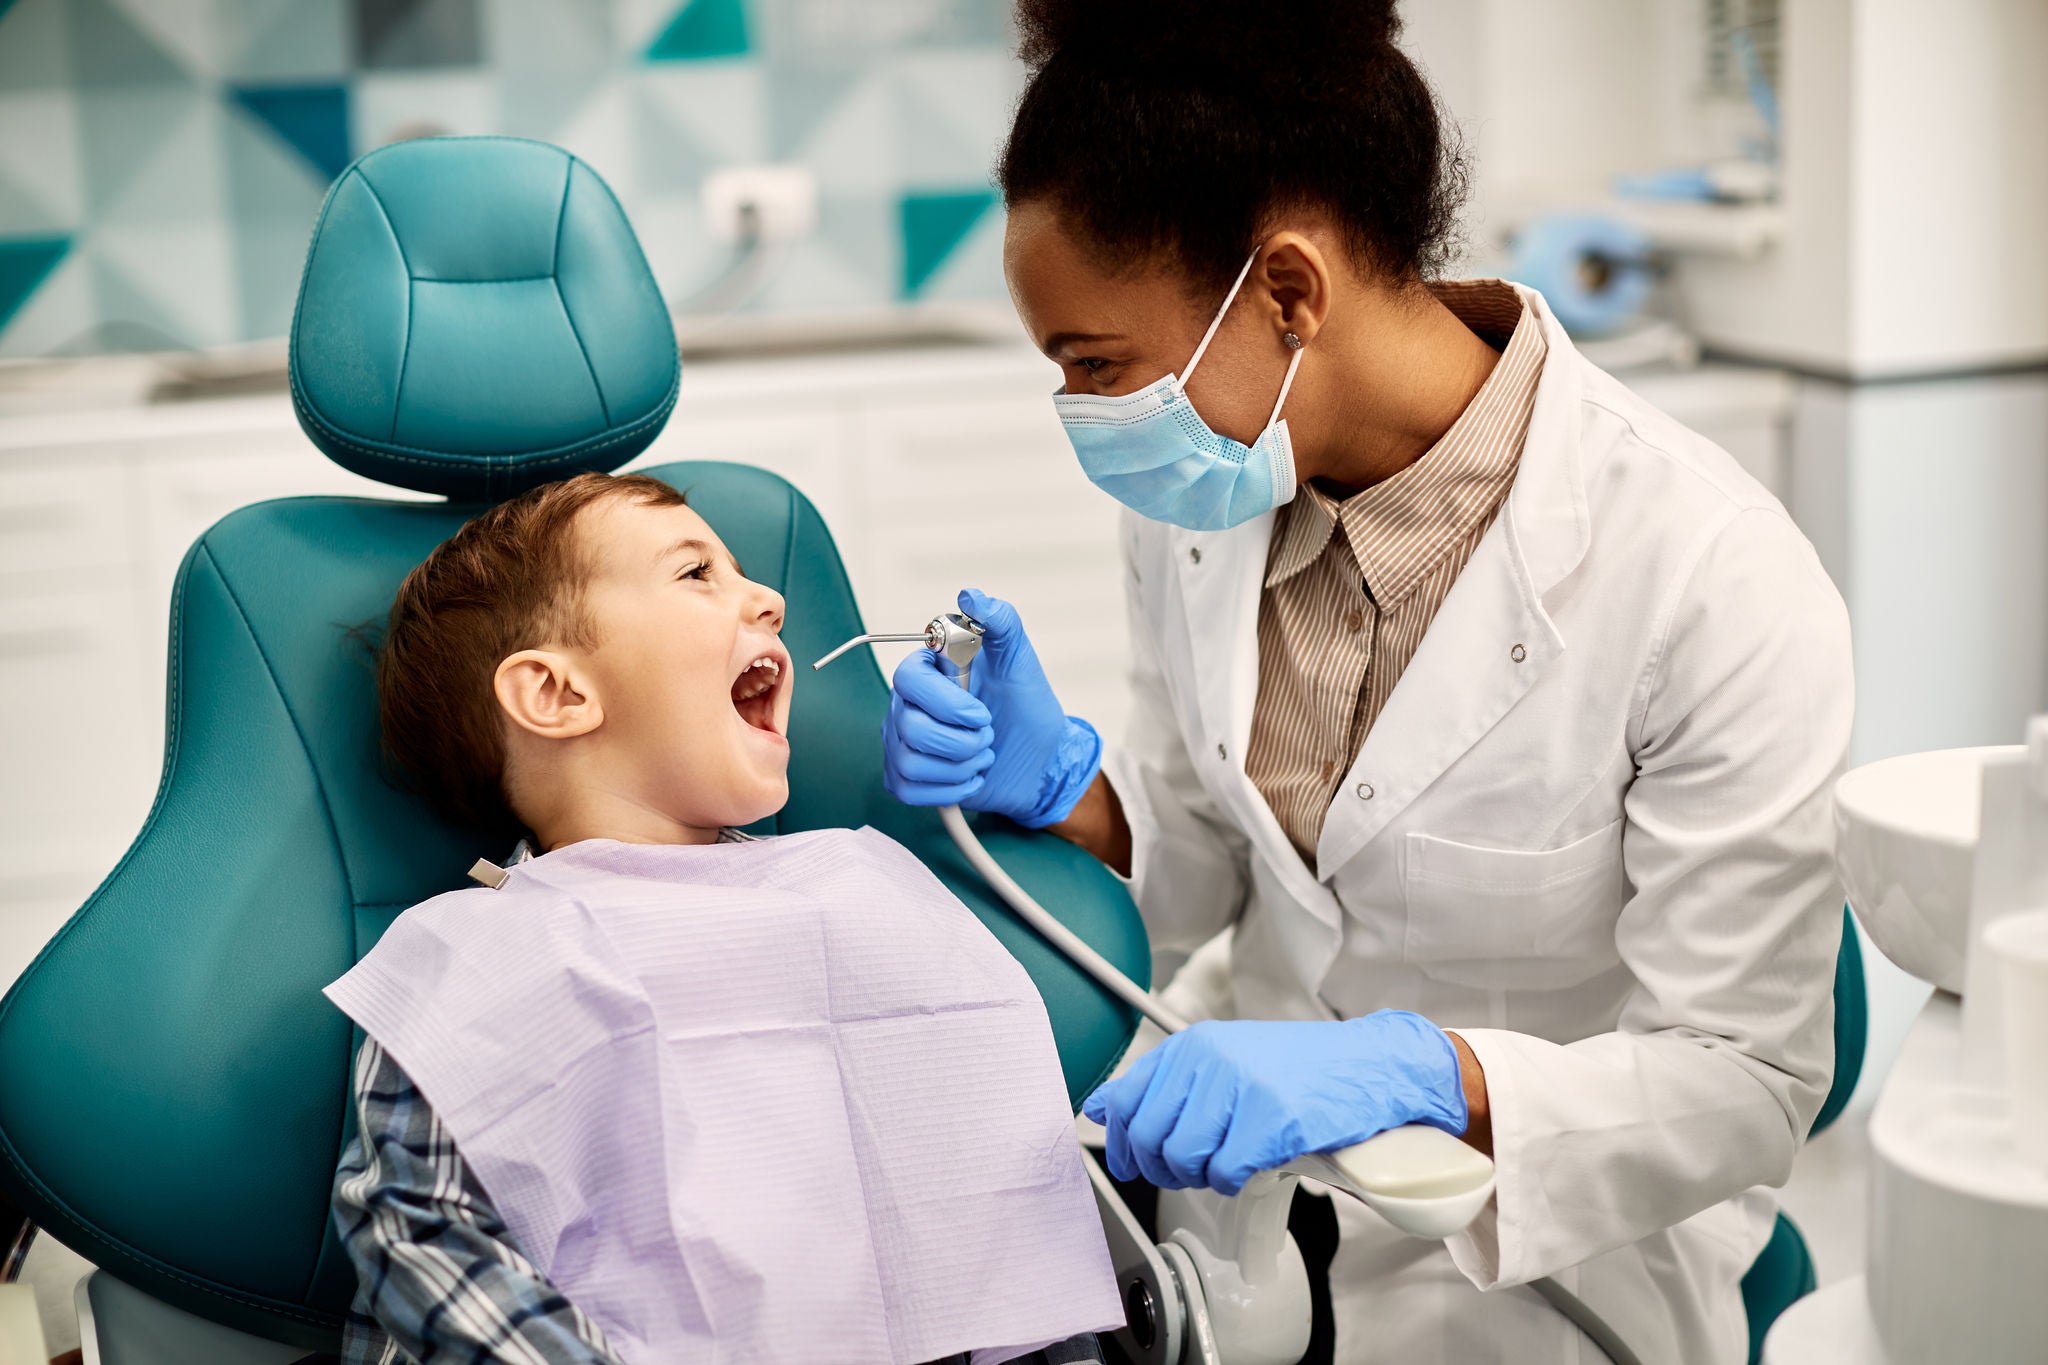 Paediatric Dentistry and Home-based Care: Top Experts Share Insight